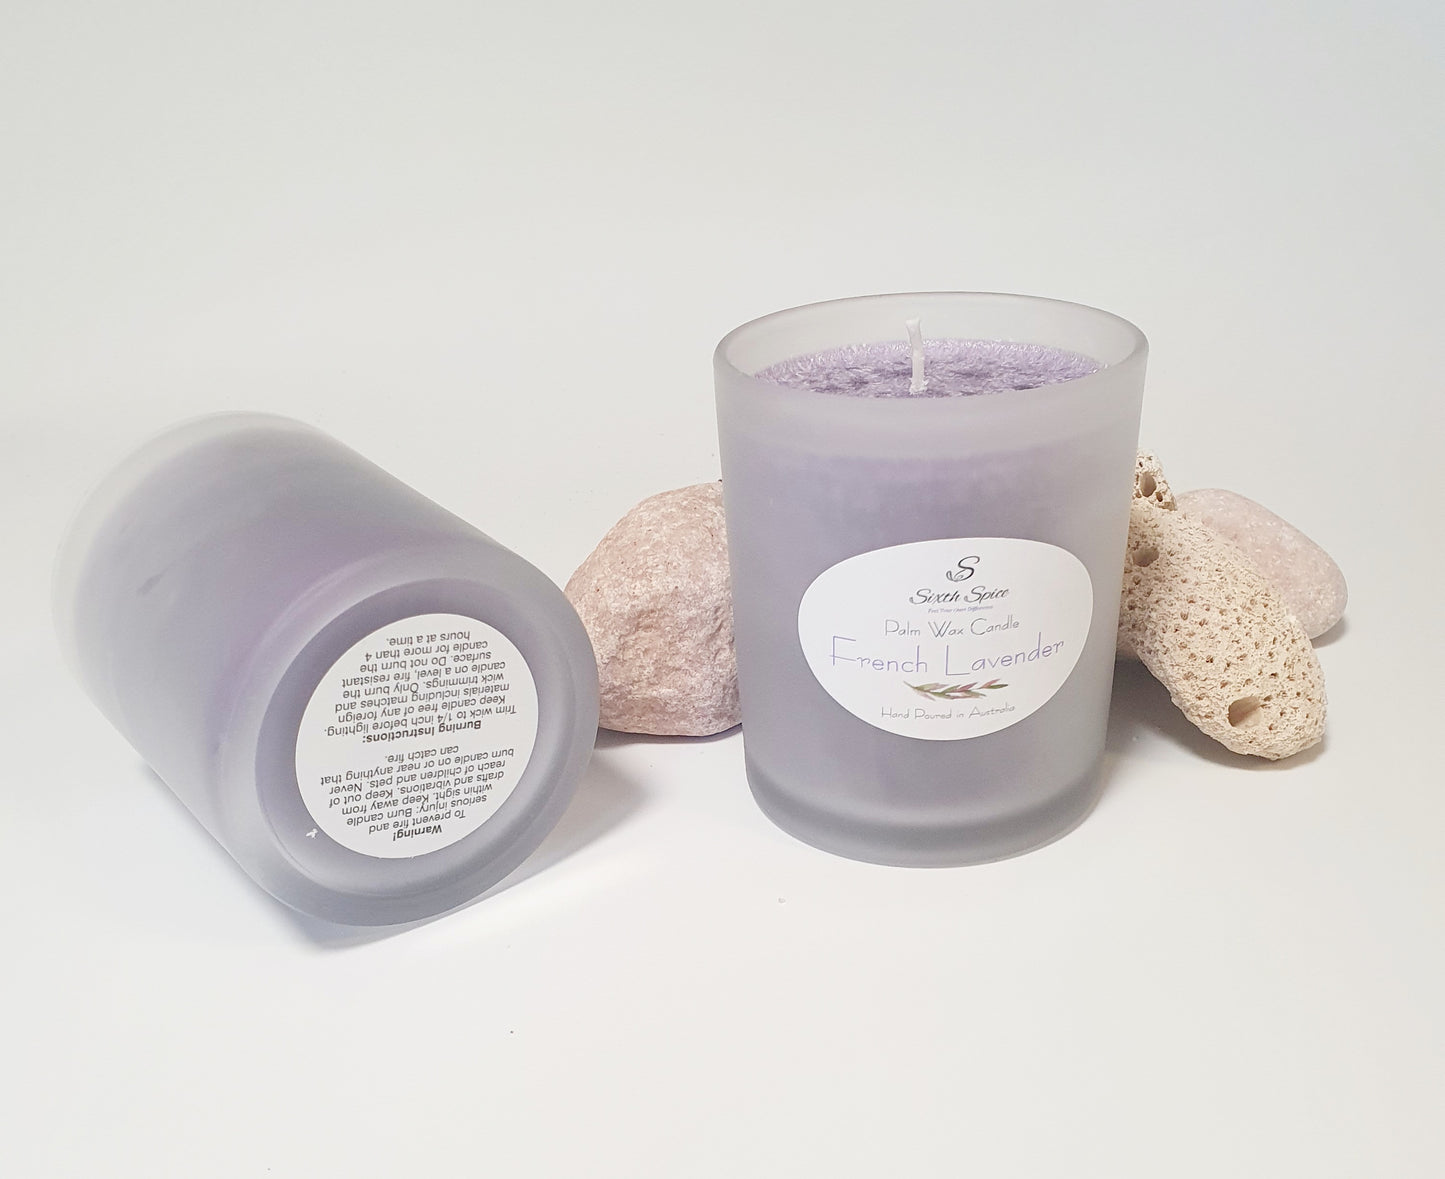 French Lavender Scented Large Palm Wax Candle